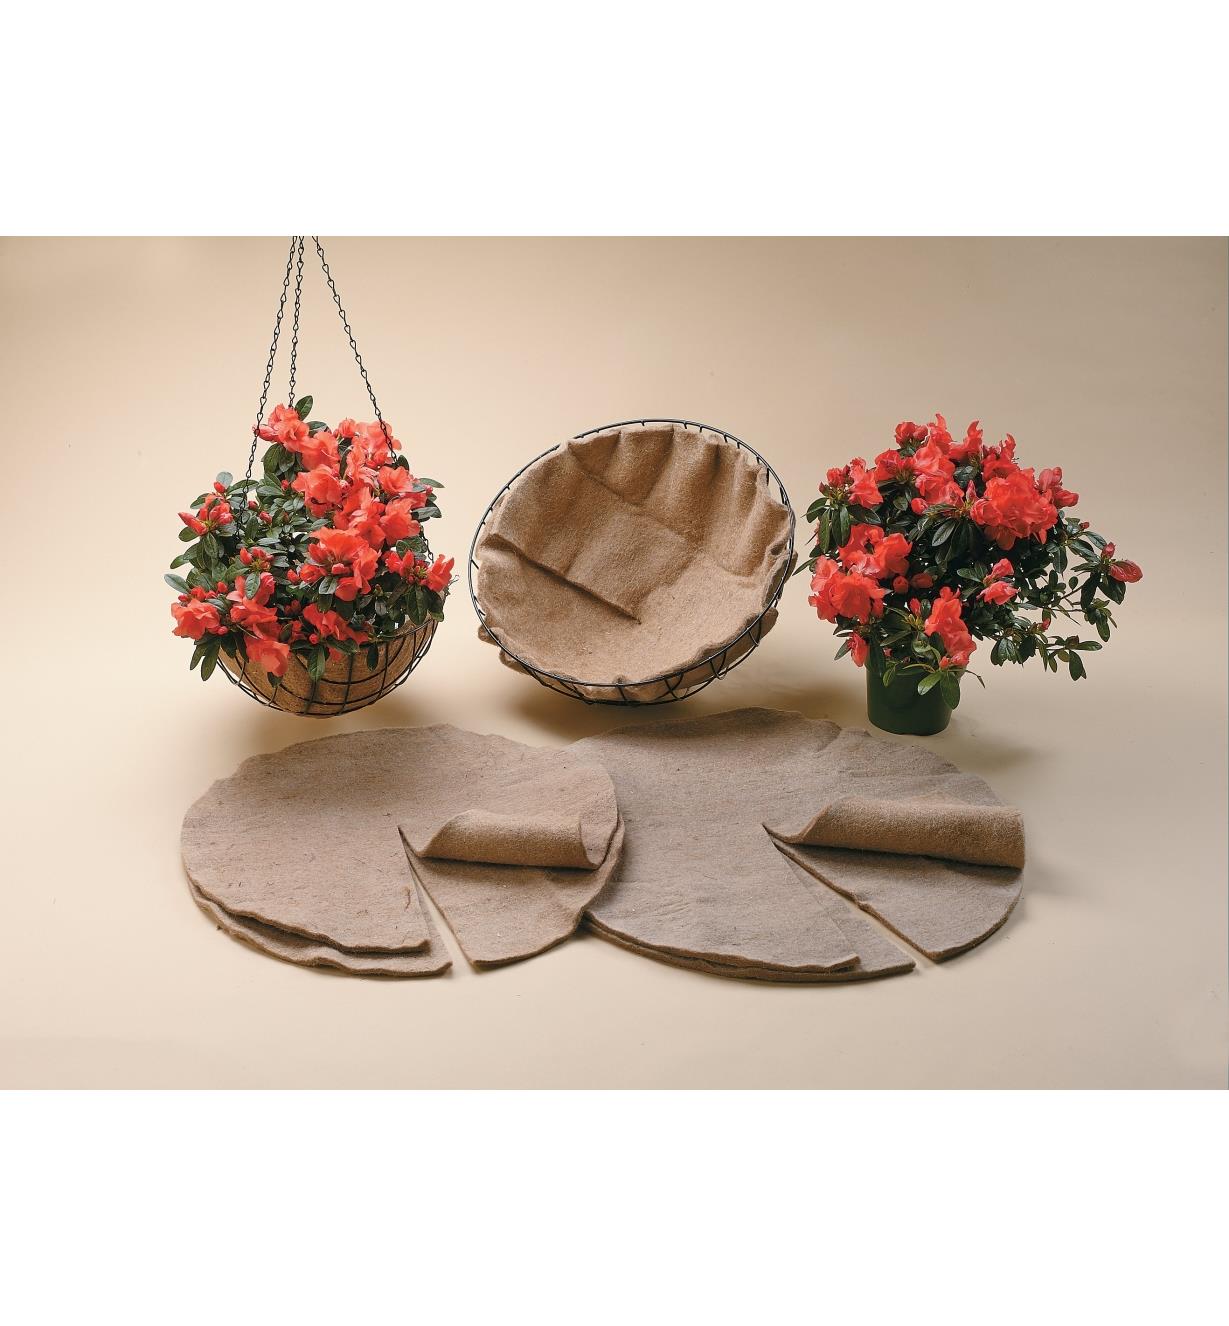 Both sizes of basket liners sitting in front of two baskets with liners in them, one filled with a flowering plant and hanging from chains, alongside a flowering potted plant